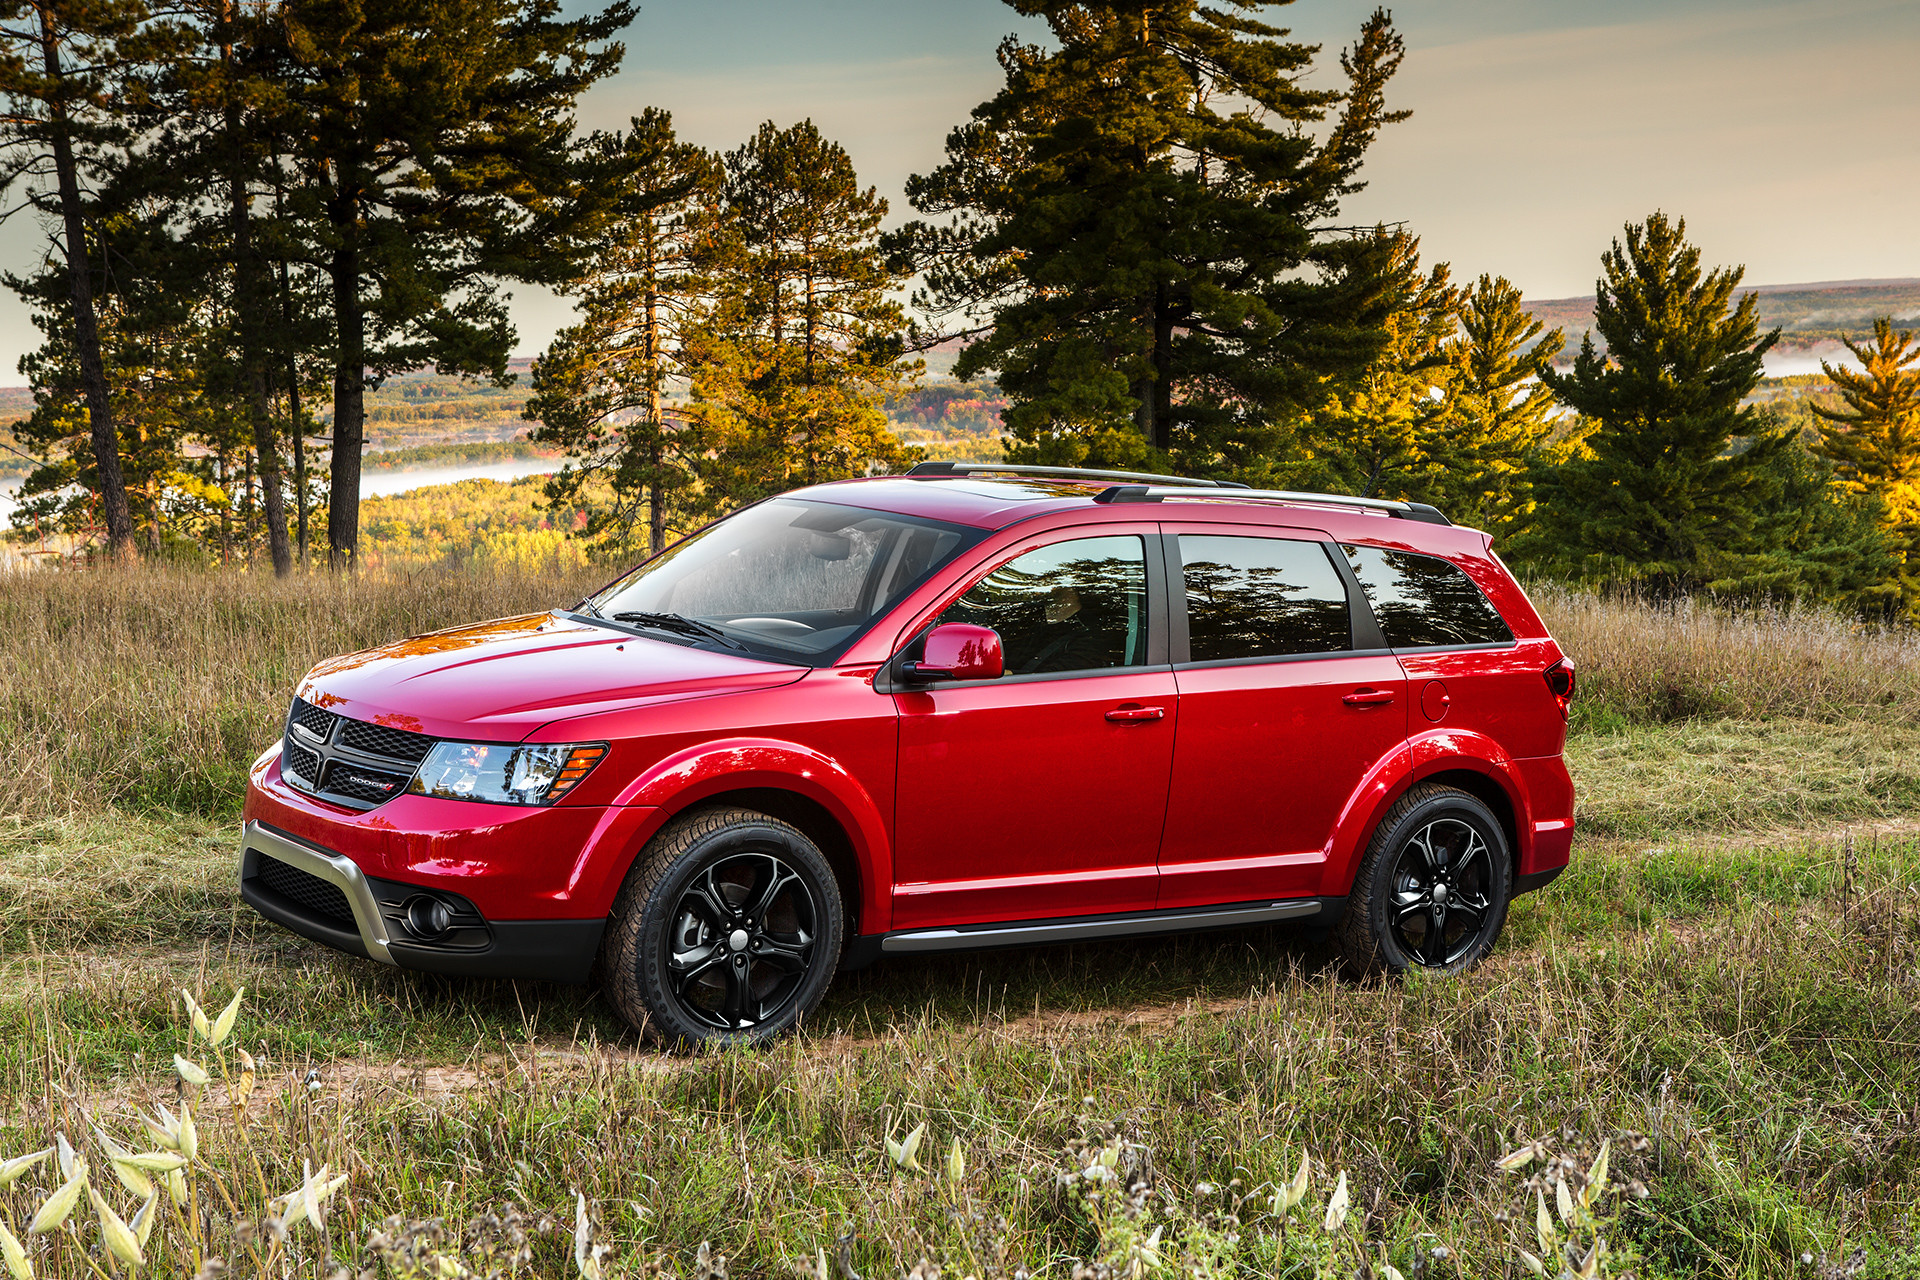 Side view of the red 2020 Dodge Journey driving through a field